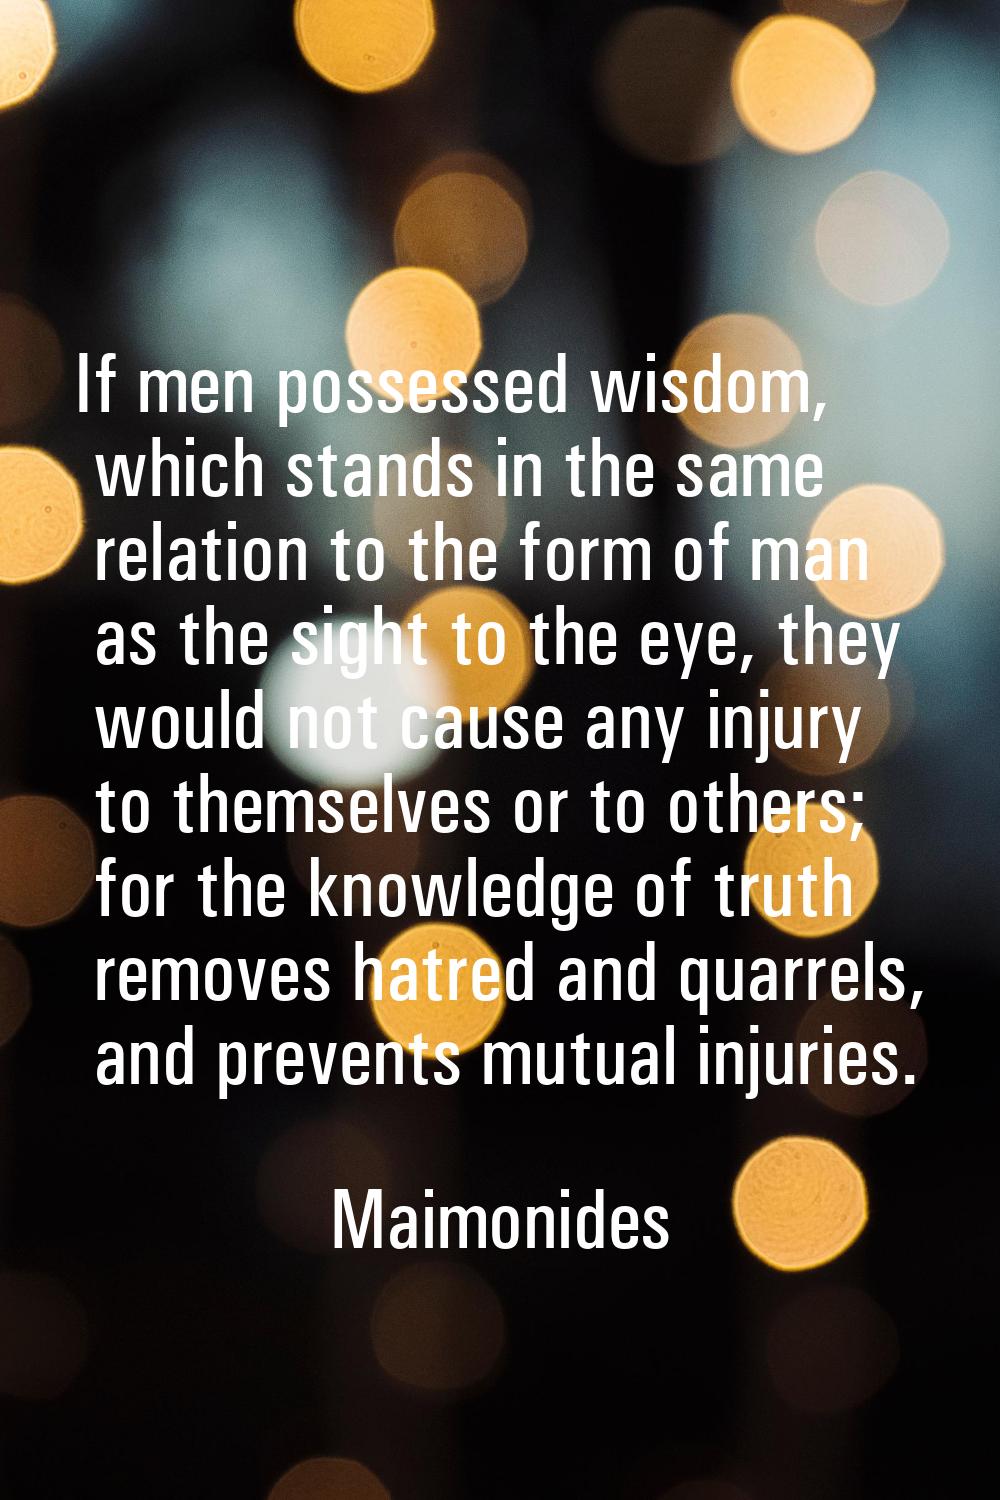 If men possessed wisdom, which stands in the same relation to the form of man as the sight to the e